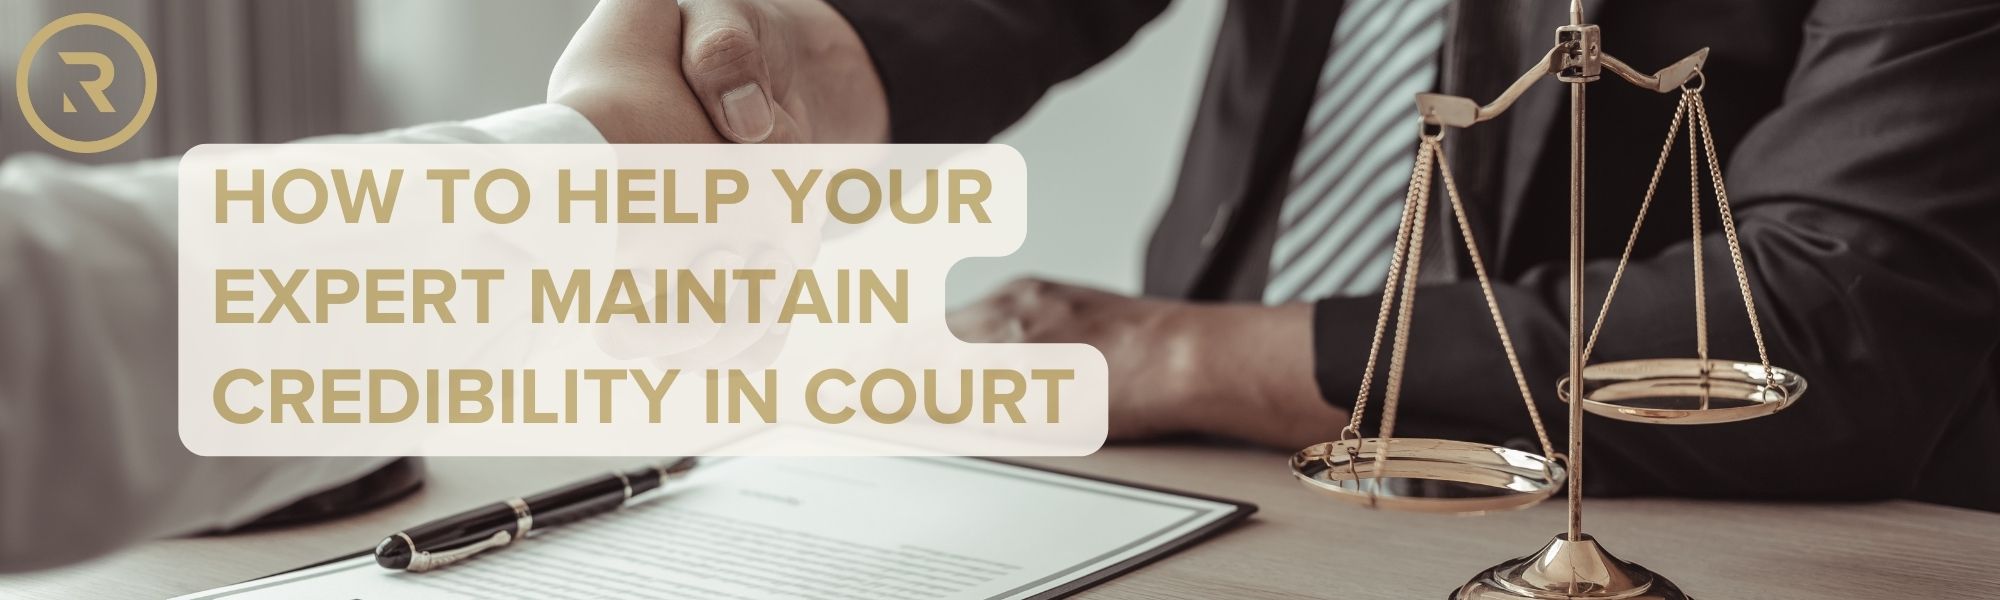 How to Help Your Expert Maintain Credibility in Court